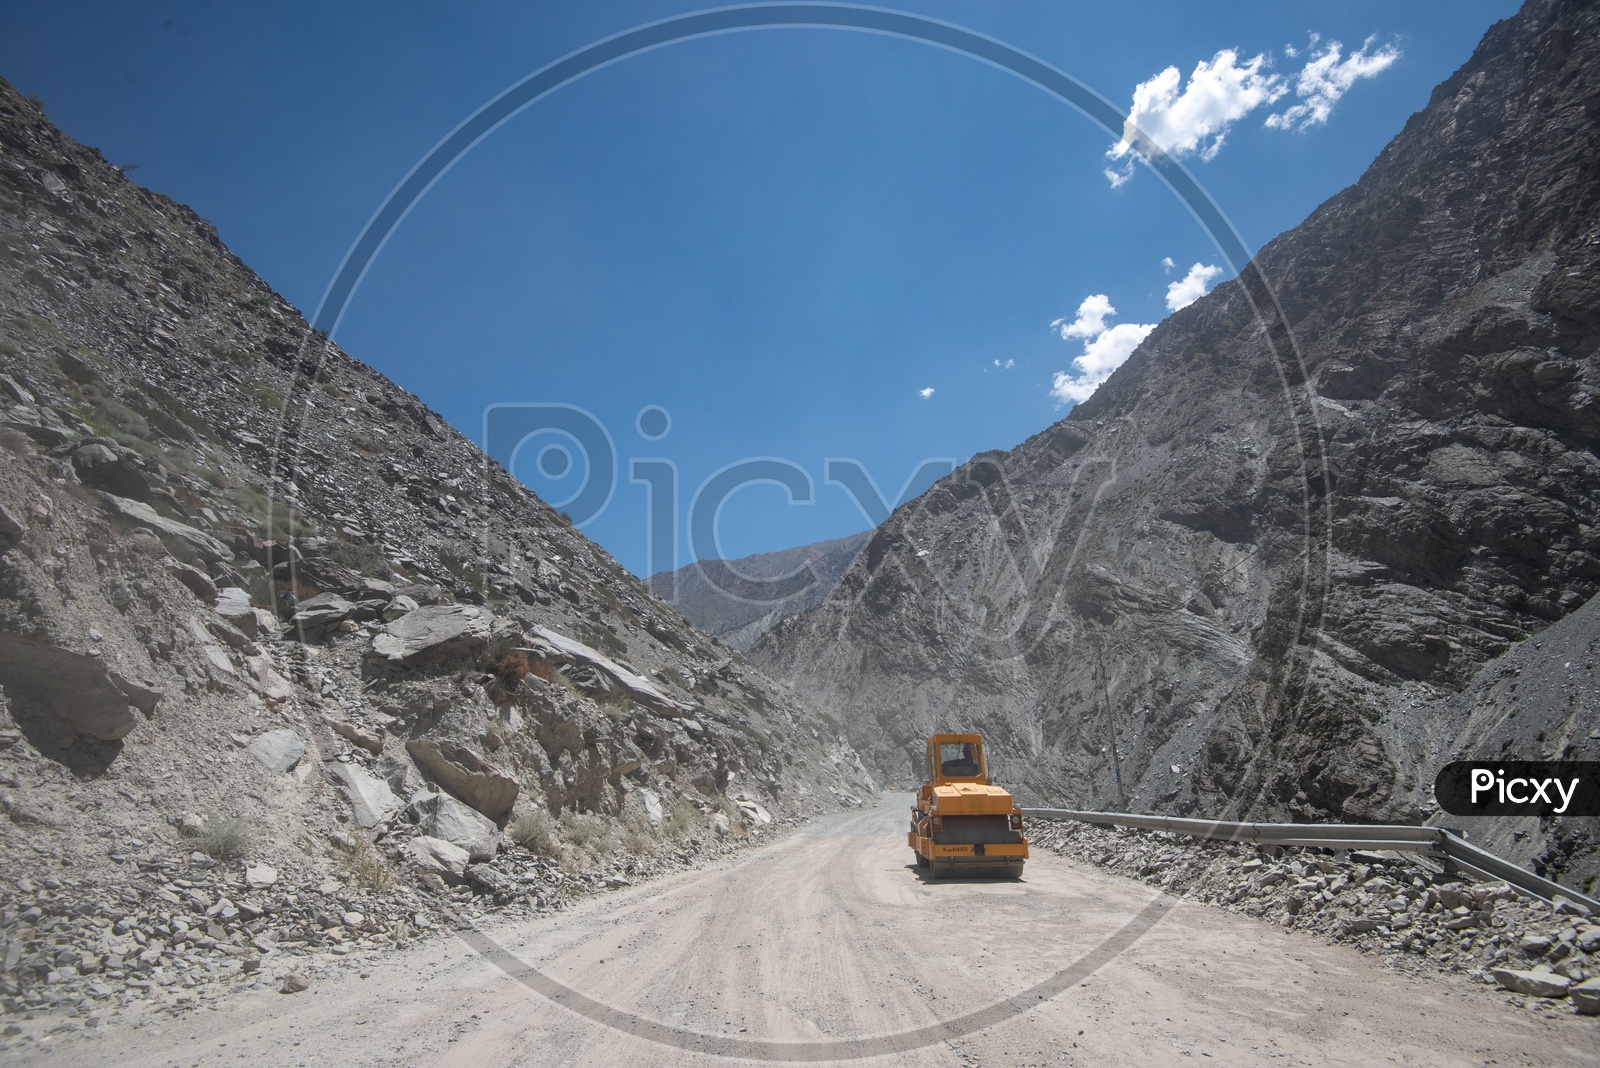 Road construction work in Spiti Valley